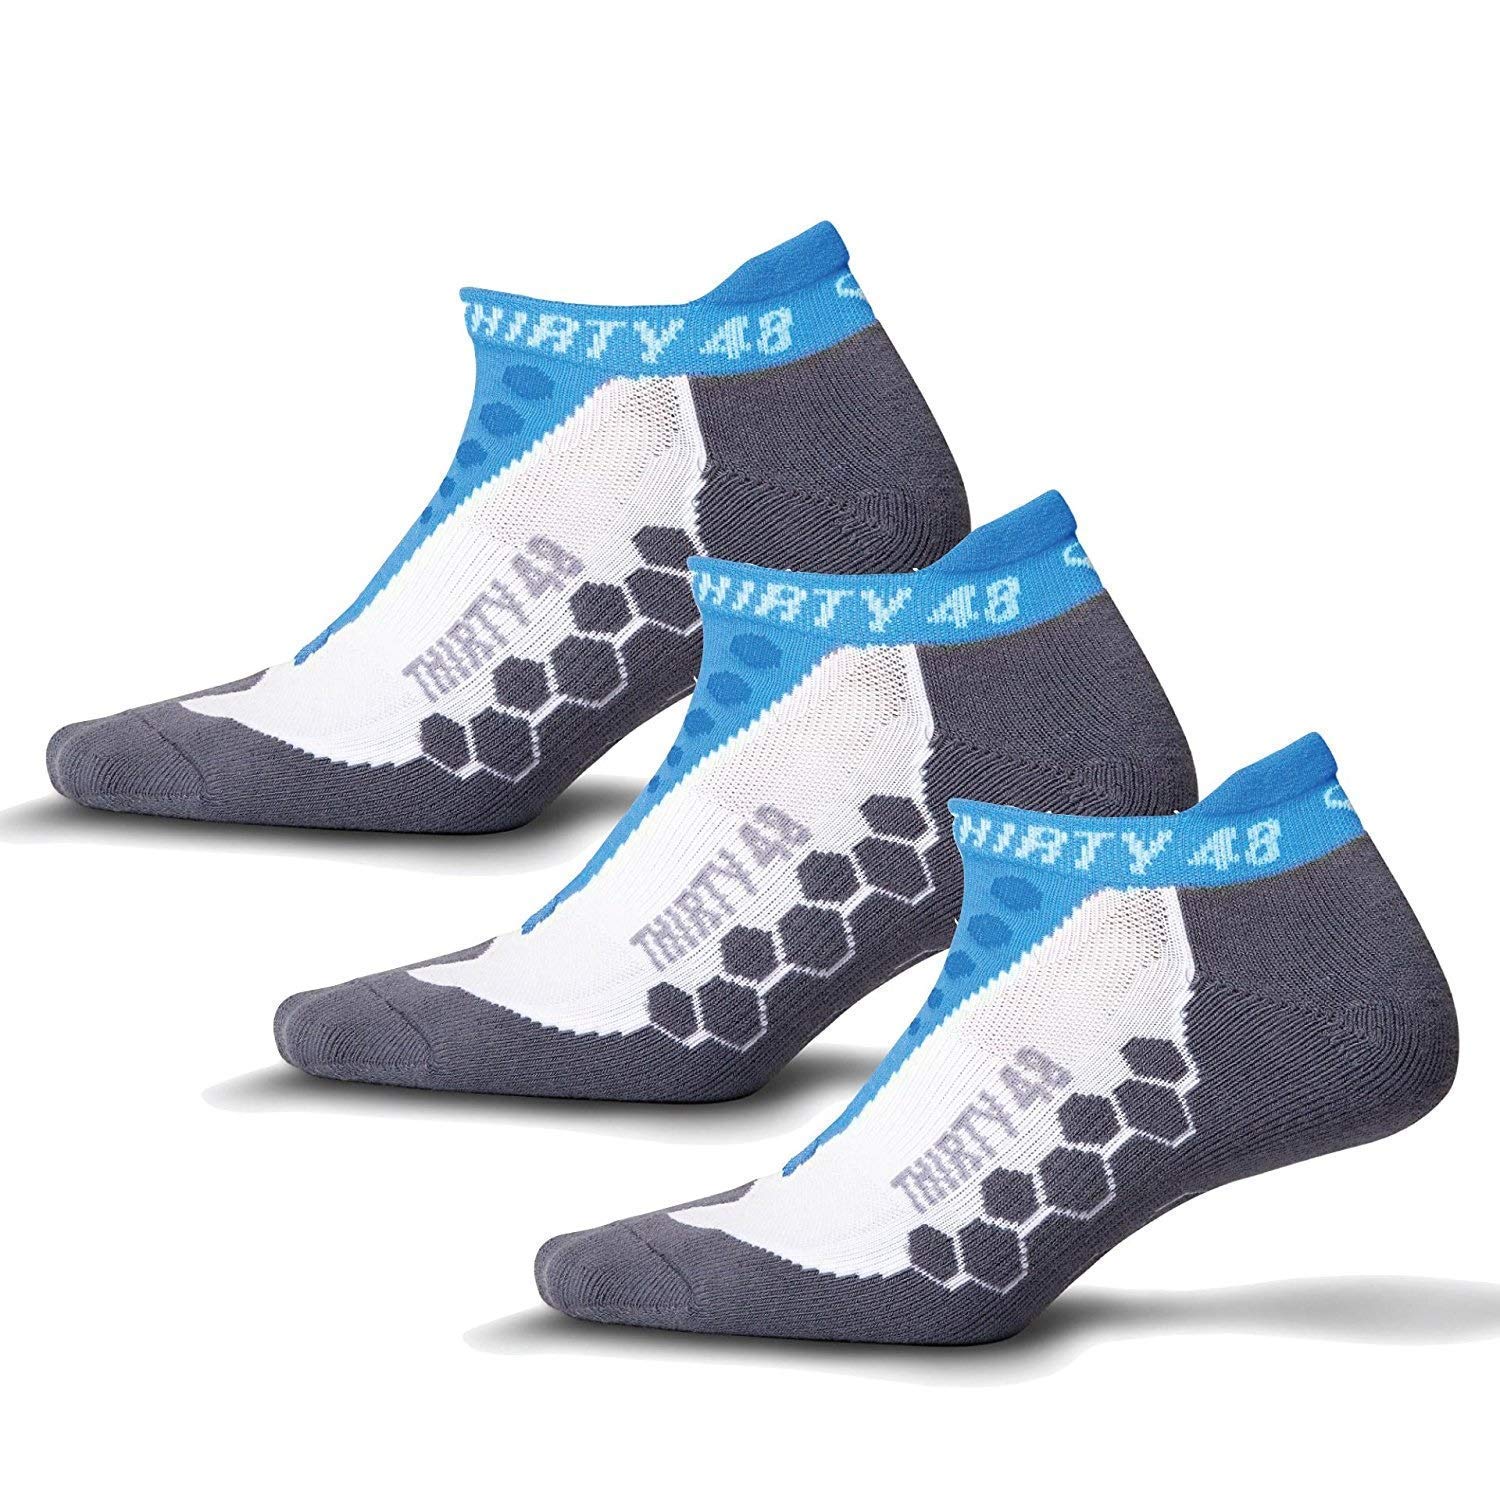 Thirty48 Running Socks for Men and Women Features Coolmax Fabric